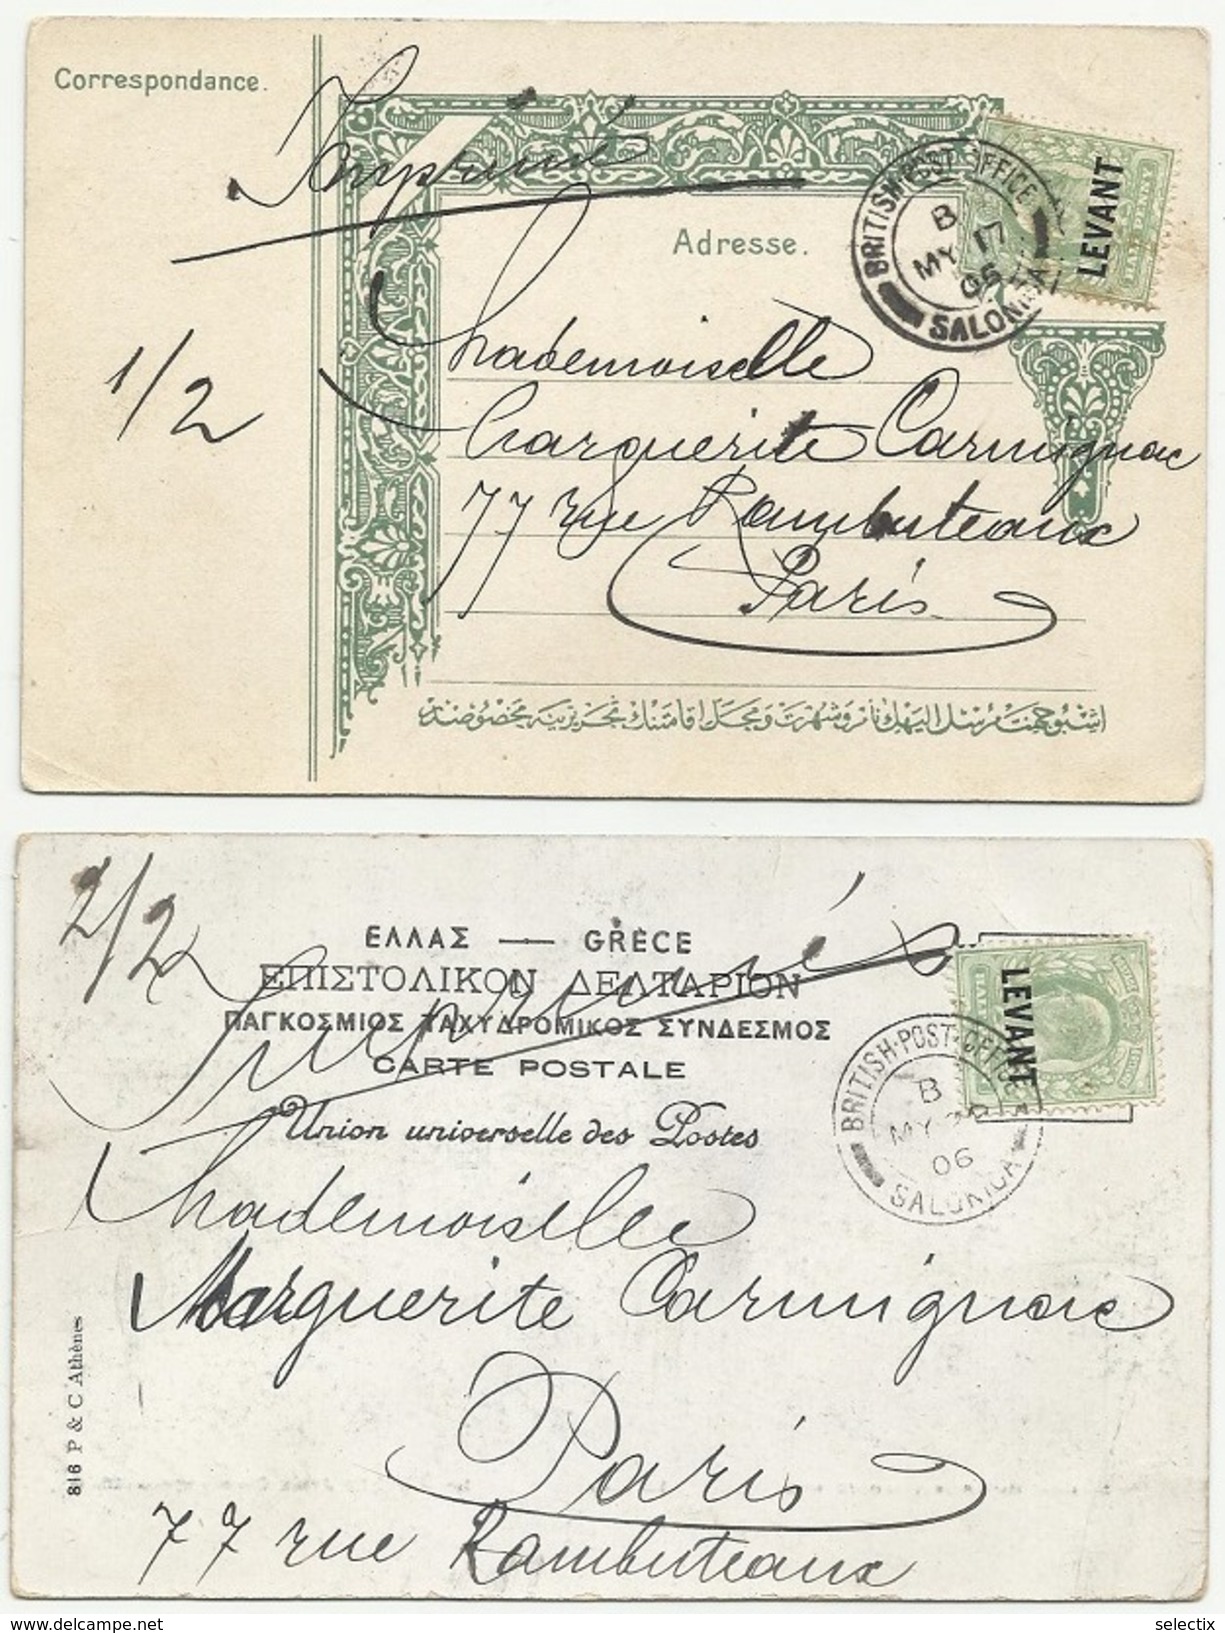 Greece 1906 Thessaloniki - Salonique - British Post Office In The Levant - Salonica - Set Of 2 Cards - Thessaloniki